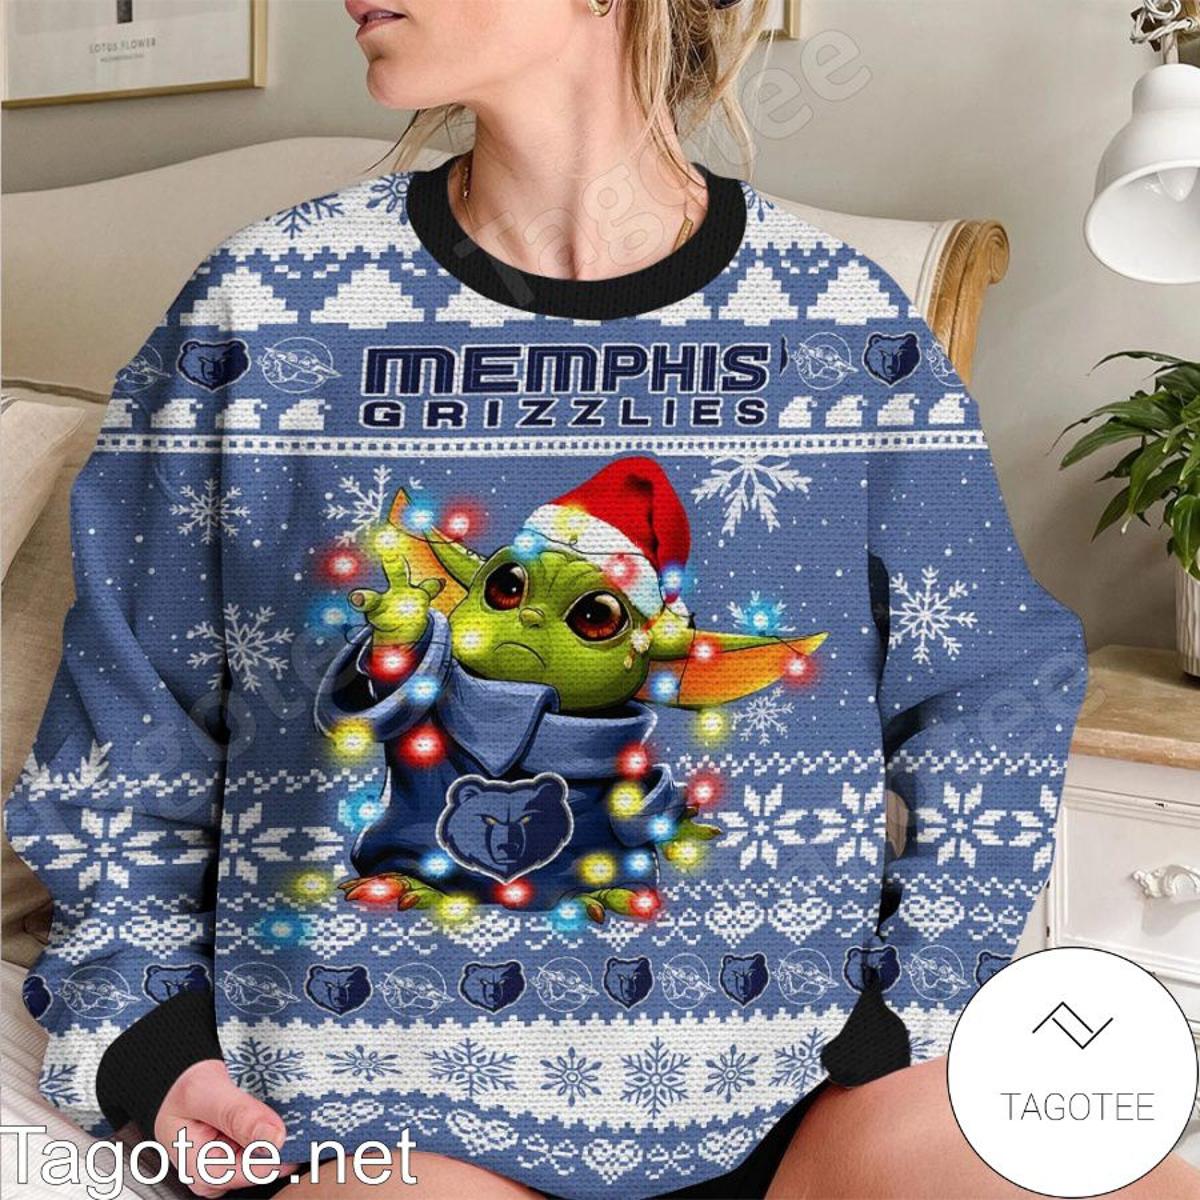 Memphis Grizzlies Blue White Baby Yoda Best Ugly Christmas Sweater